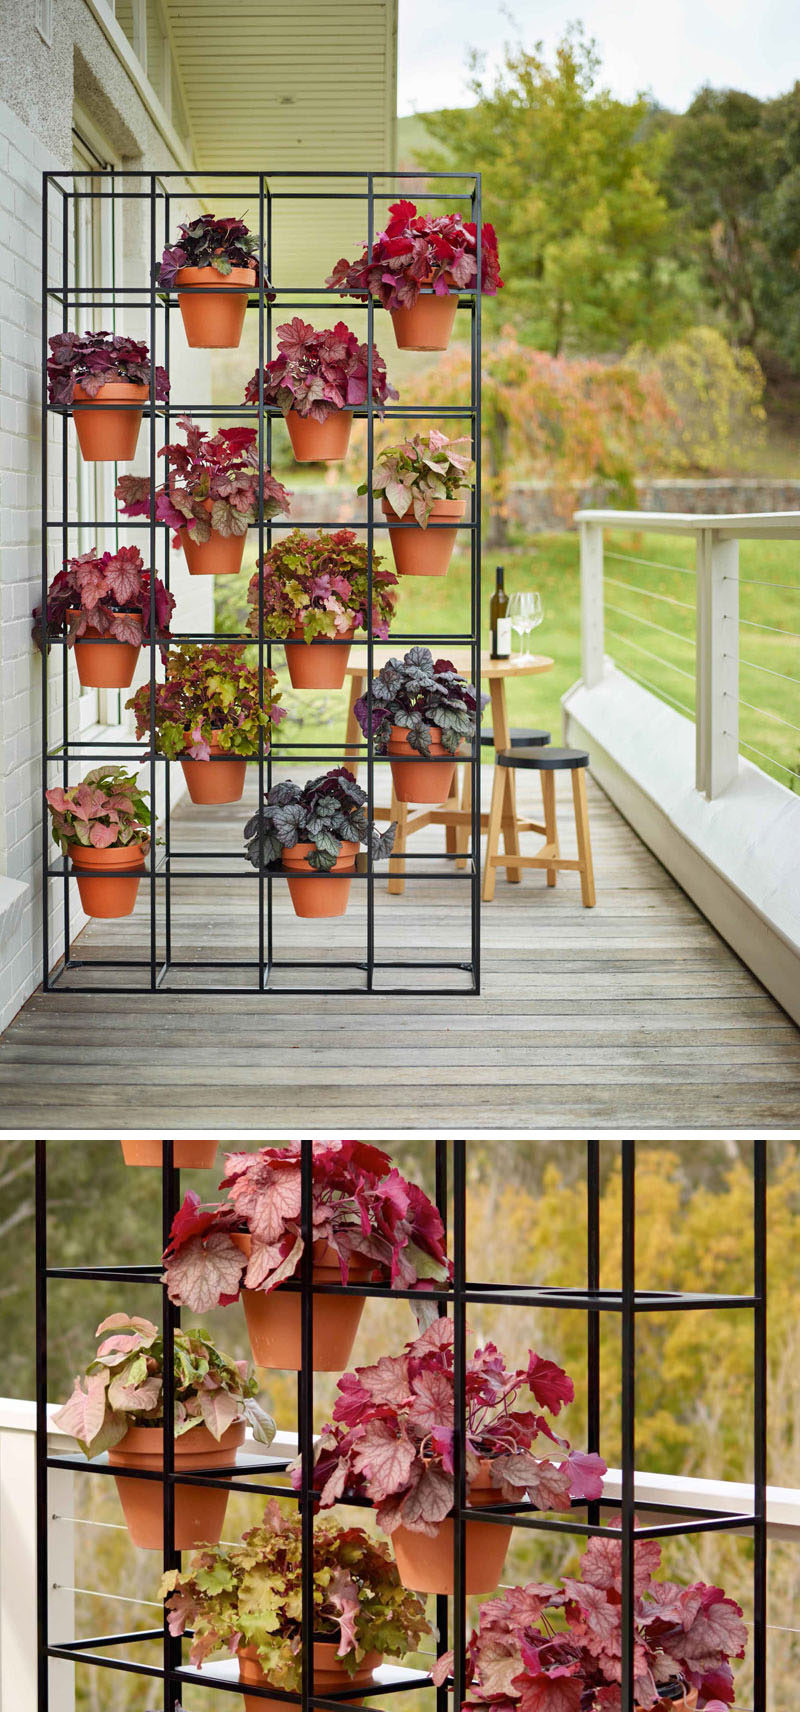 Use a standalone vertical garden outdoors to create a separation between spaces.